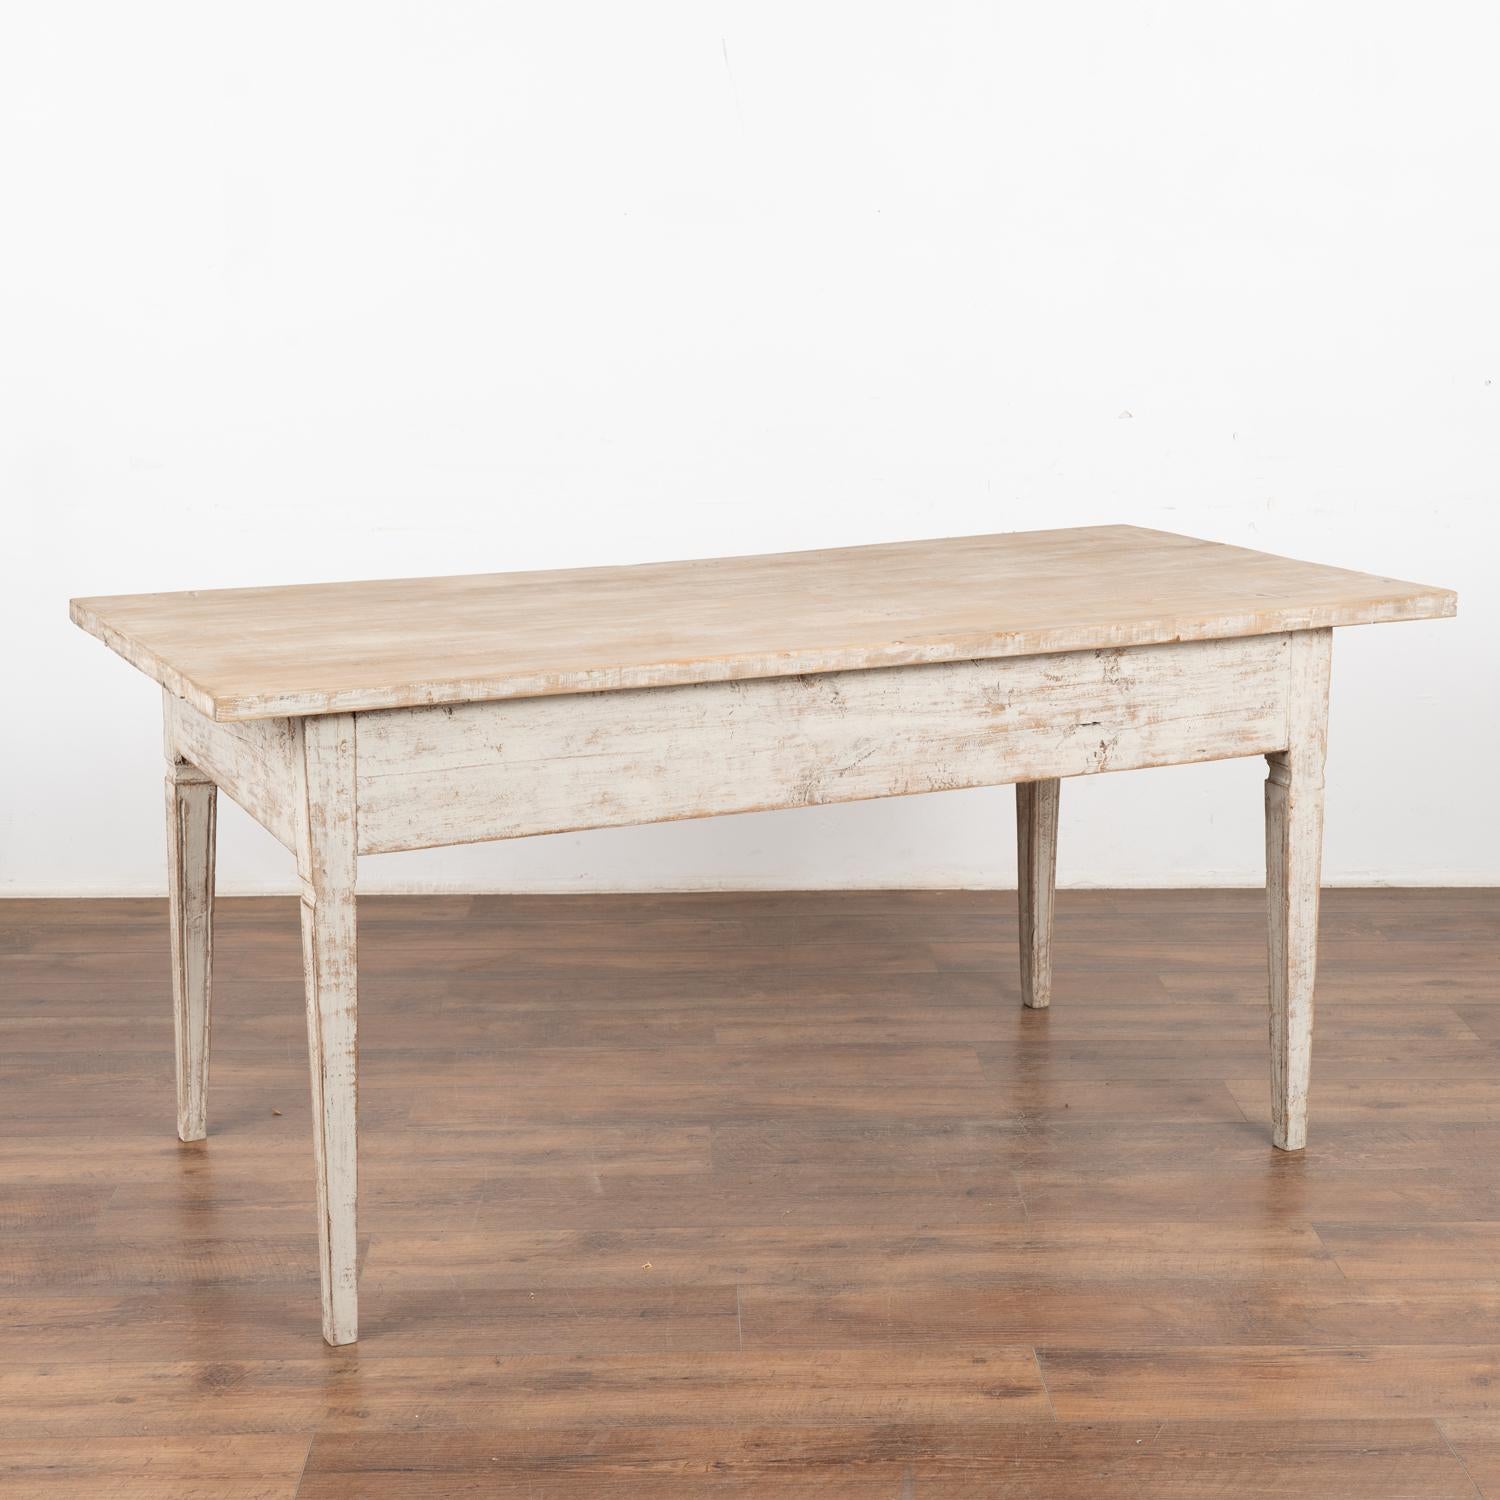 White Painted Gustavian Style Table Writing Desk With One Drawer, circa 1860-80 For Sale 4